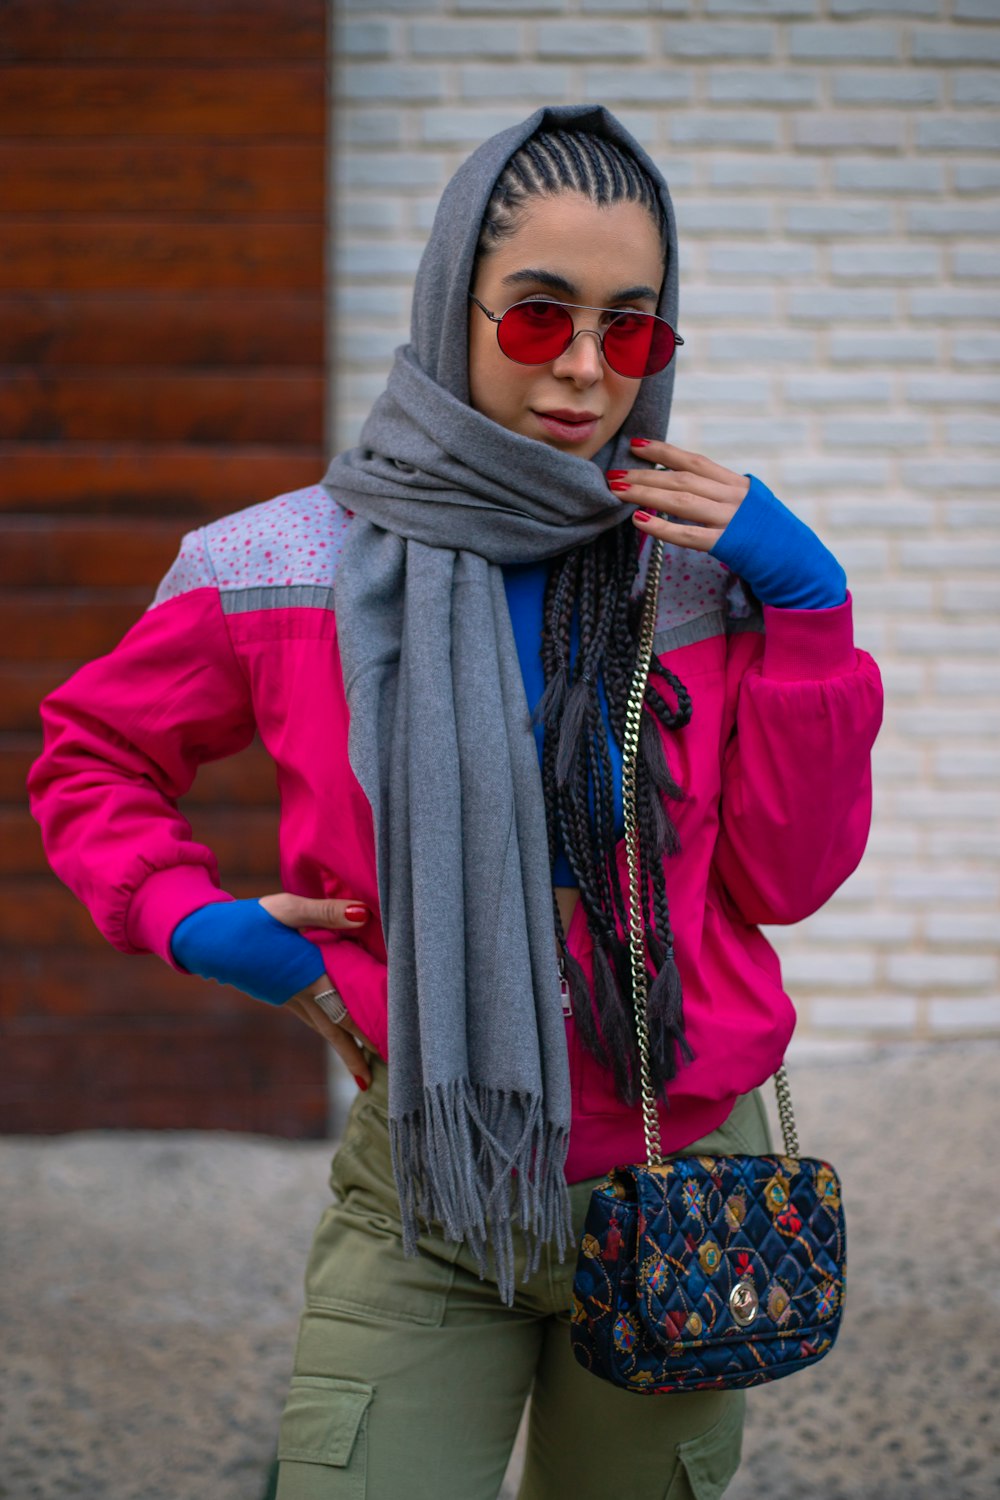 a woman wearing a pink jacket and scarf